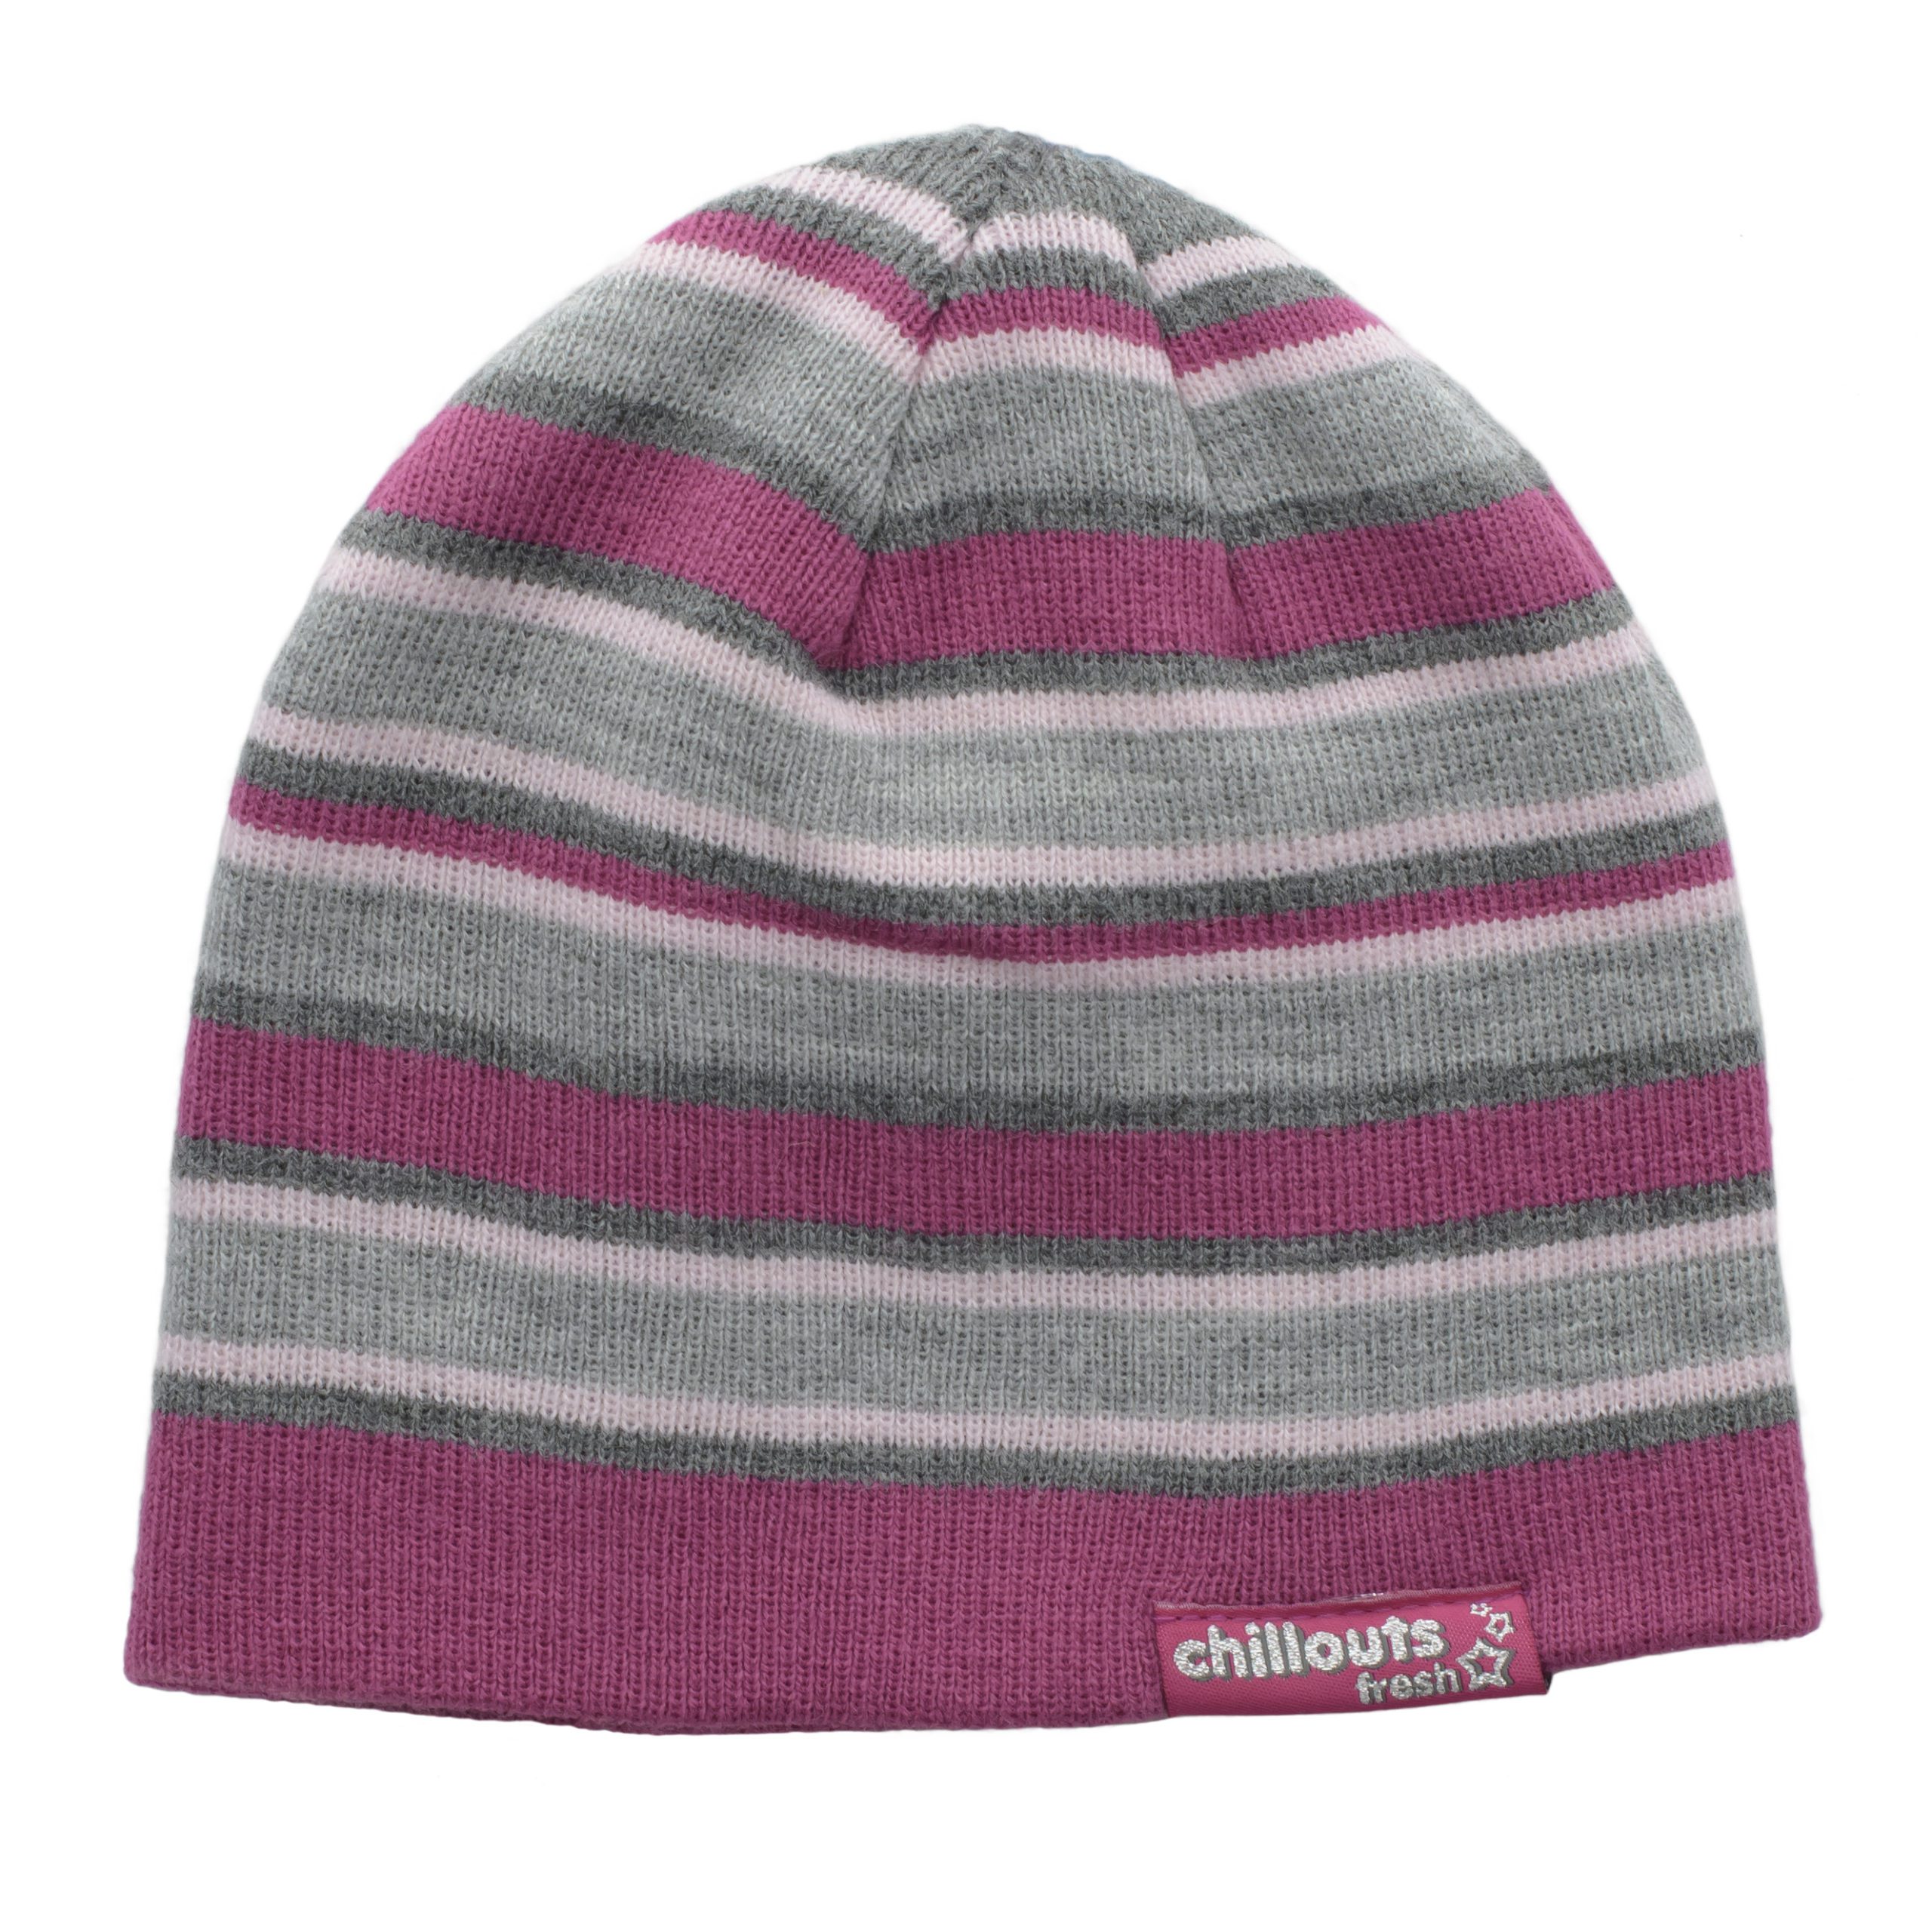 CHILLOUTS KID’S KNITTED BEANIE -PINK/GREY